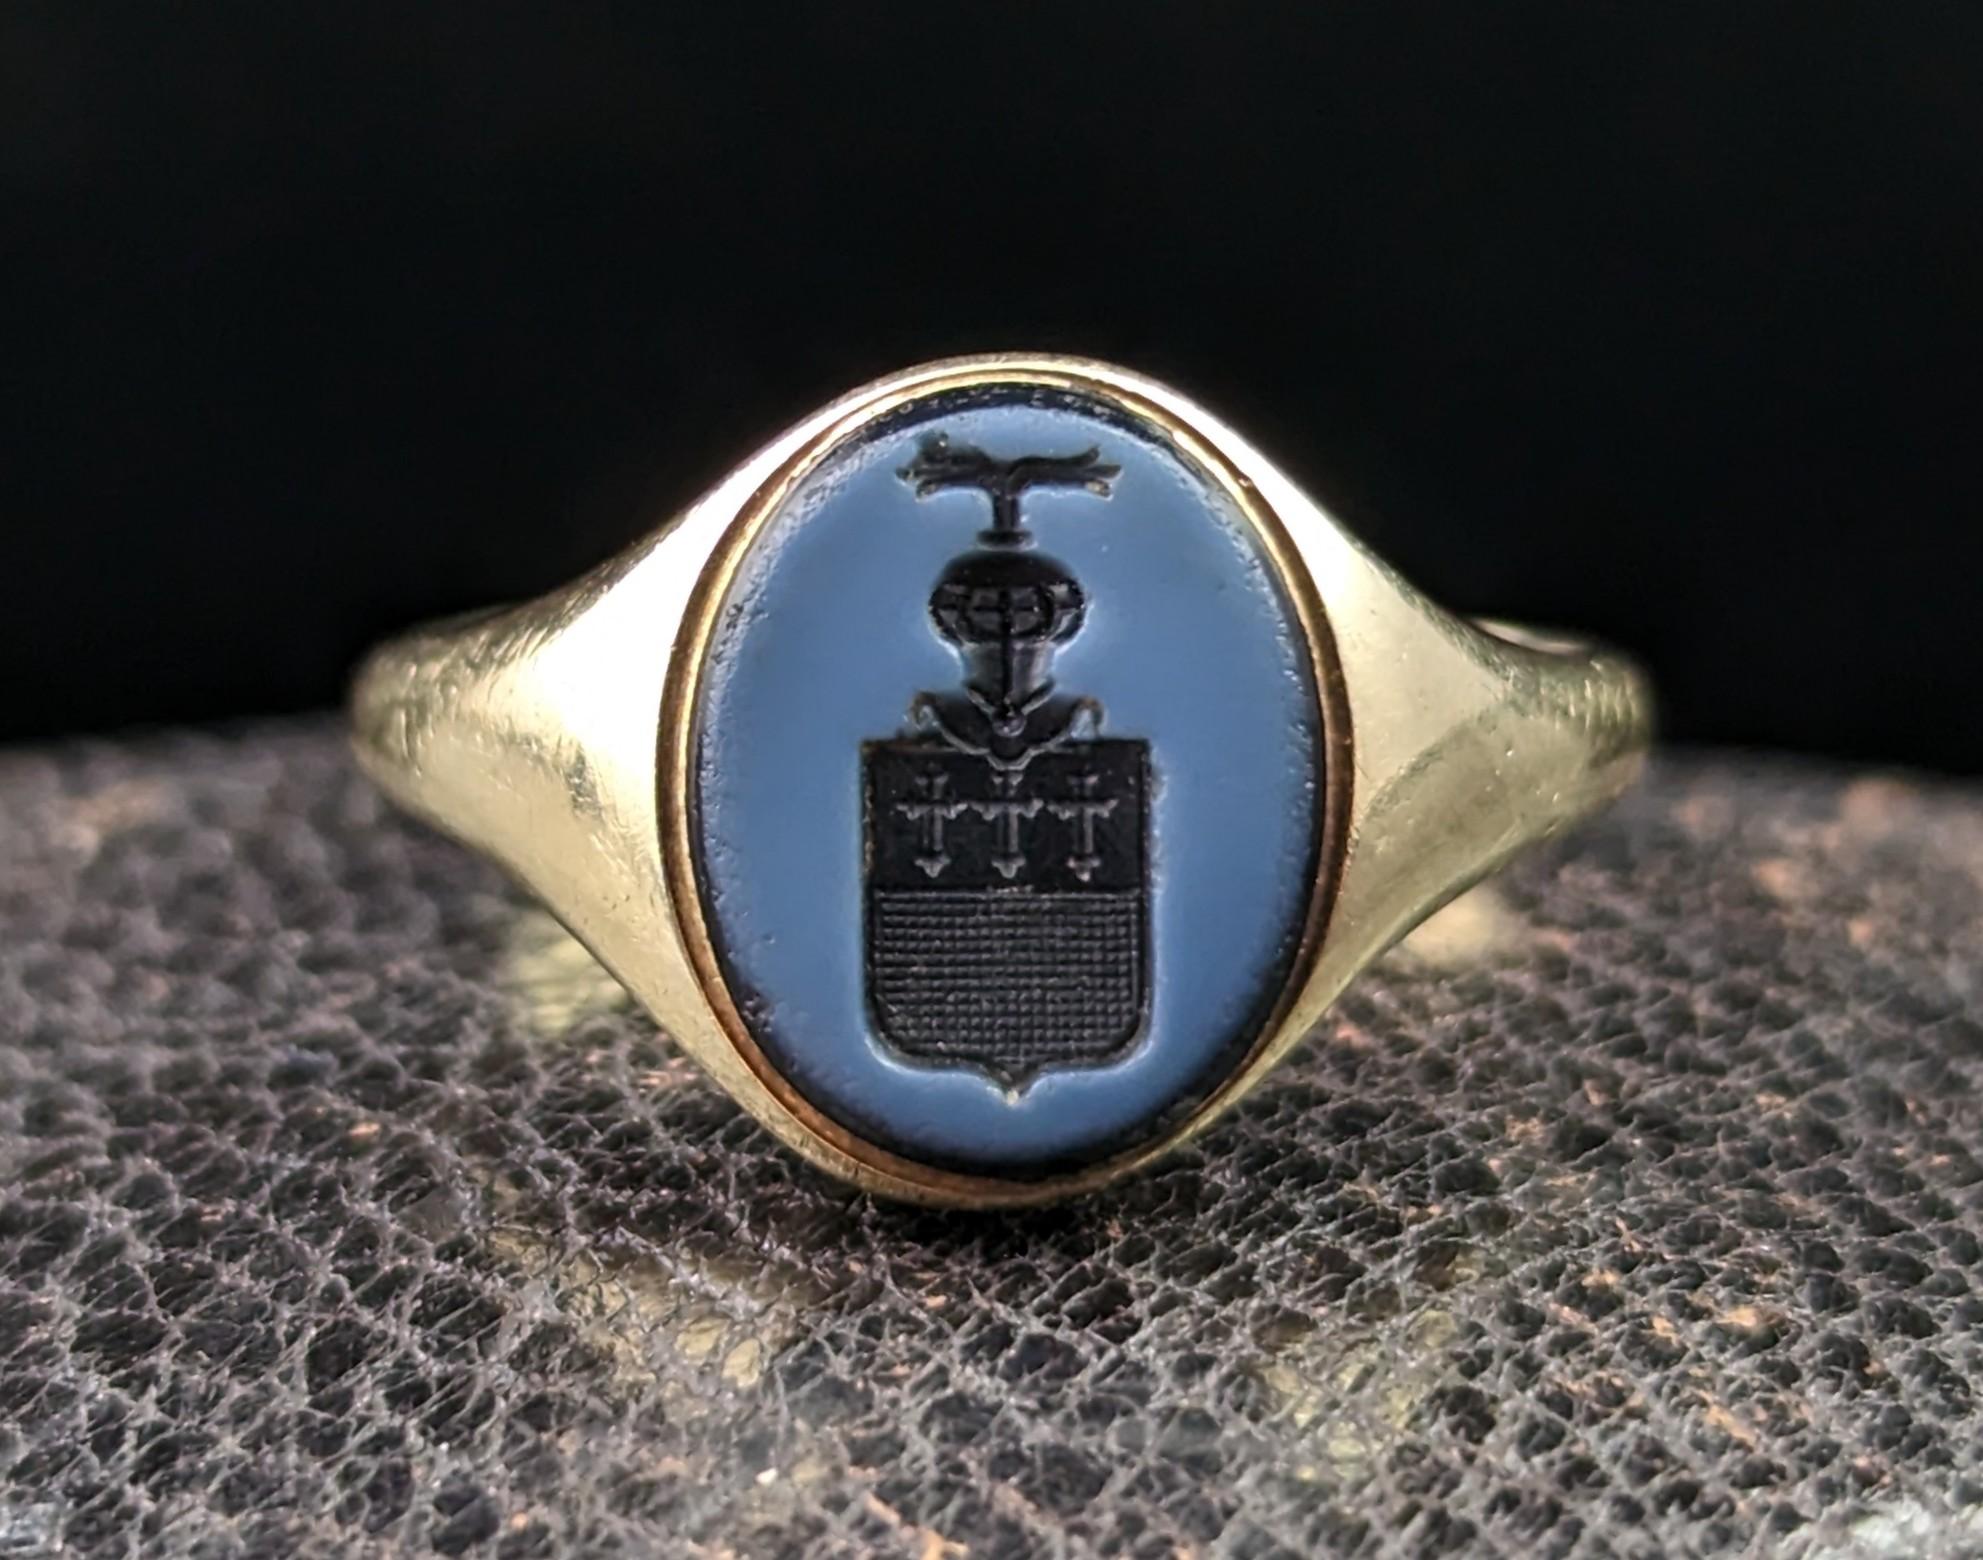 This impeccable antique, Edwardian era
9kt gold and Sardonyx signet ring has everything you could wish for in a signet ring!

It has an oval shaped face set with a black Sardonyx stone with a white overlay, this has a finely carved heraldic style